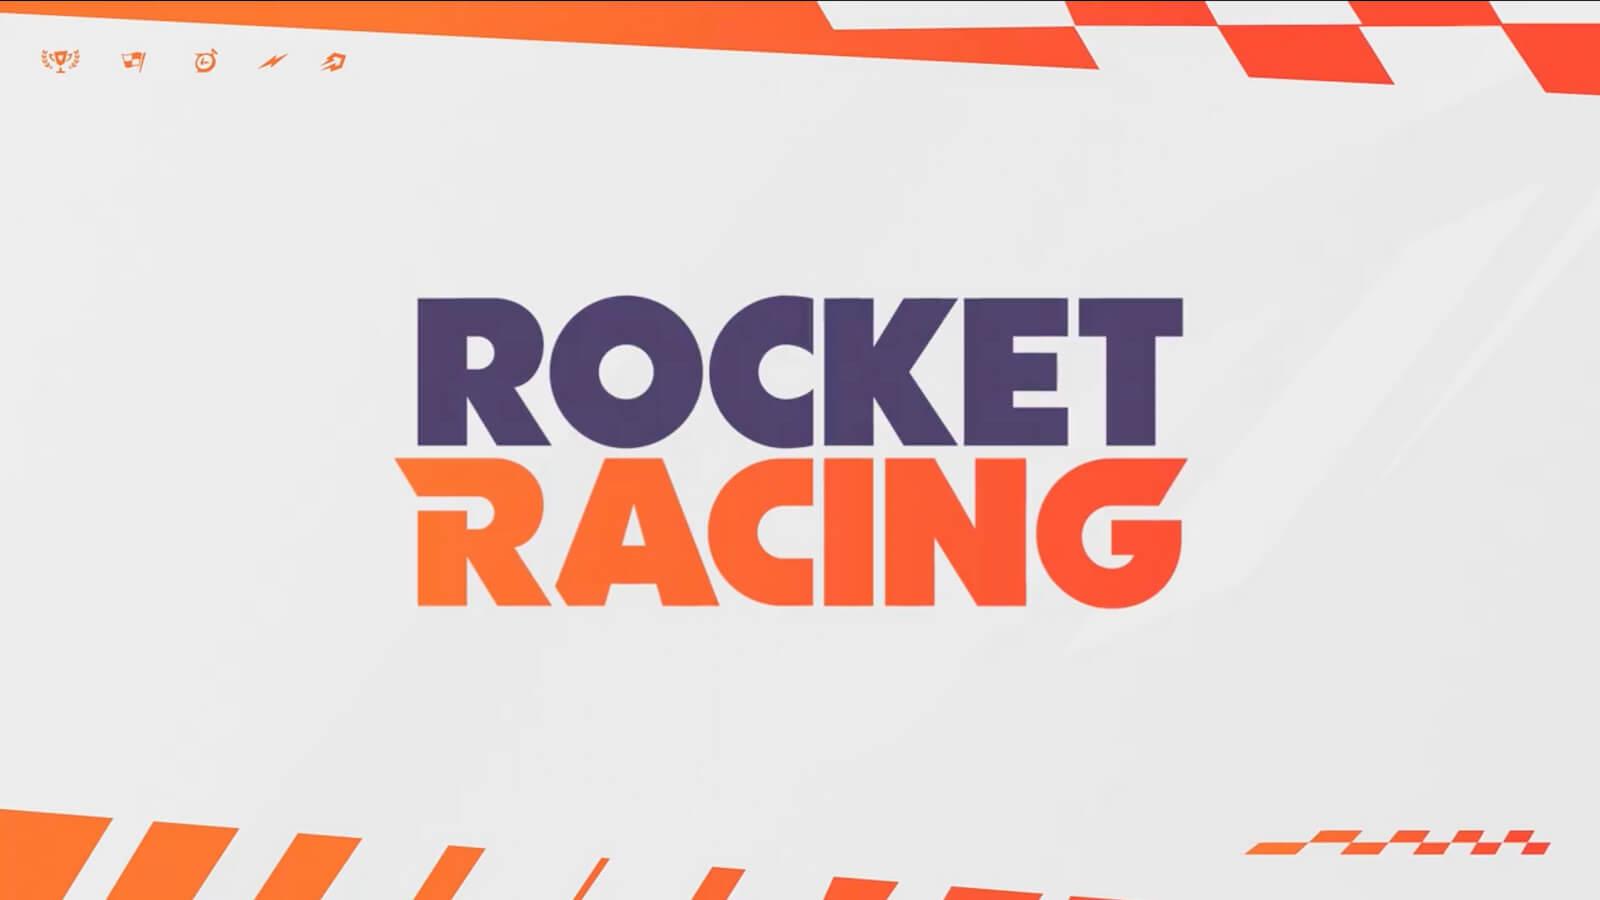 Rocket Racing announced for Fortnite as Rocket League spinoff